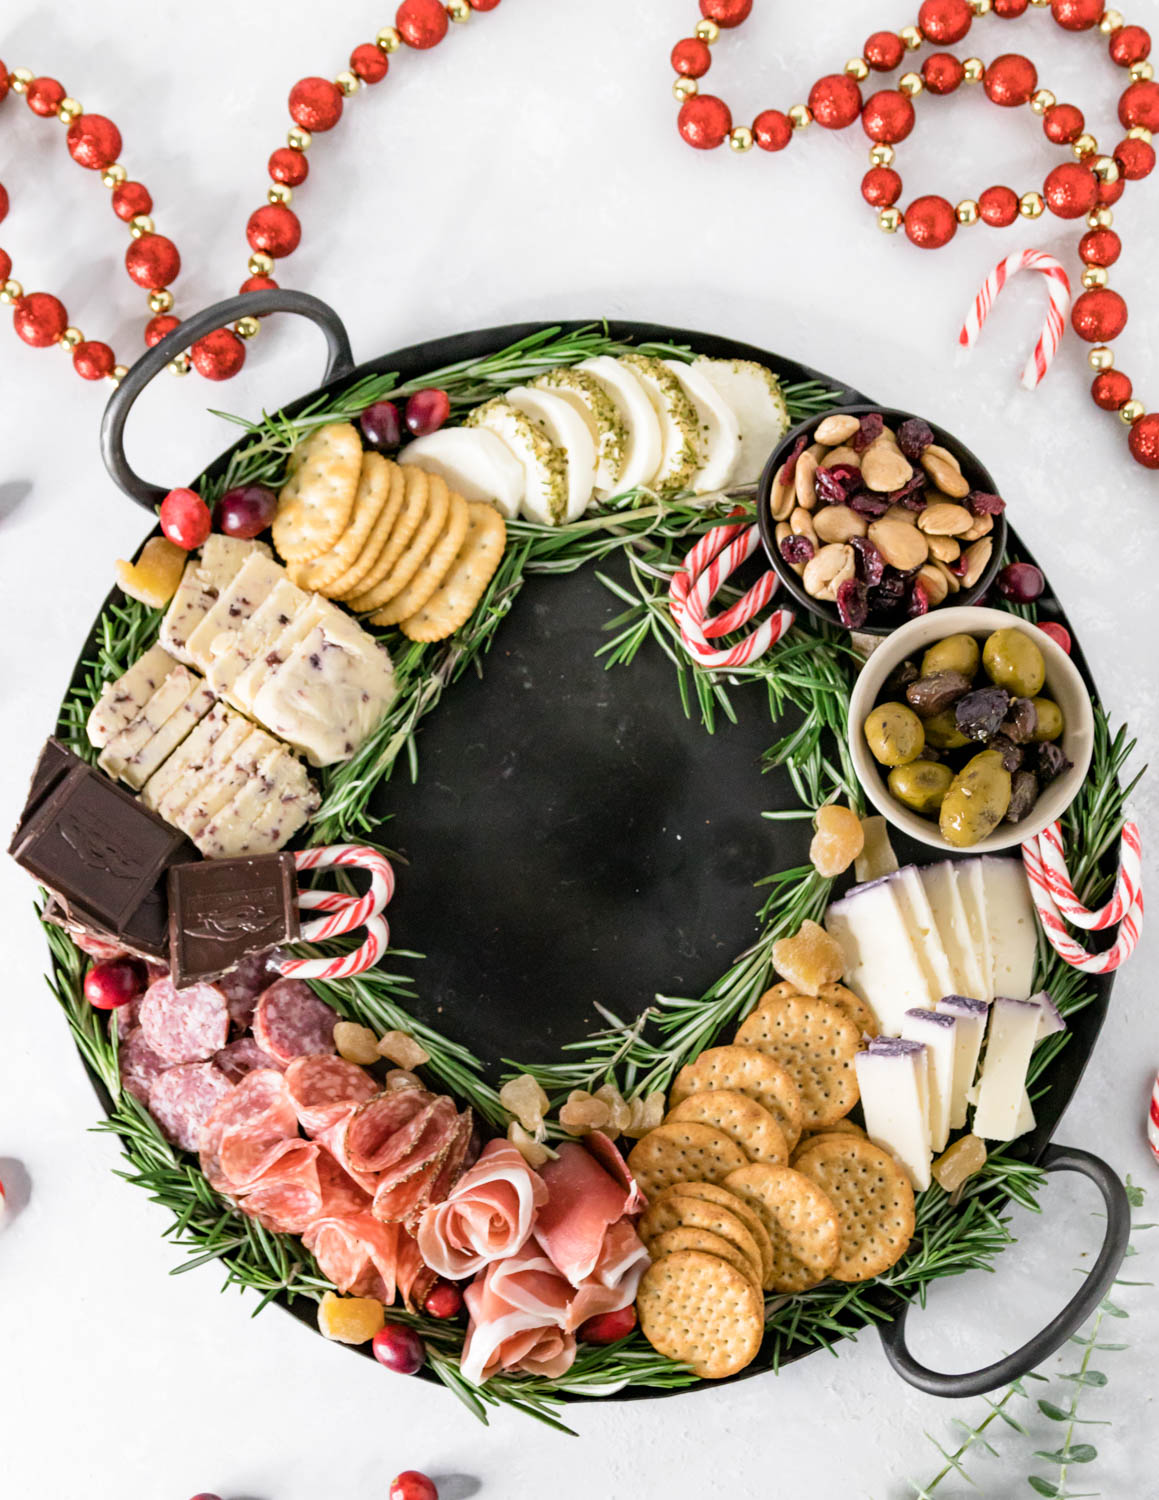 top view of the cheese board showing the wreath shape